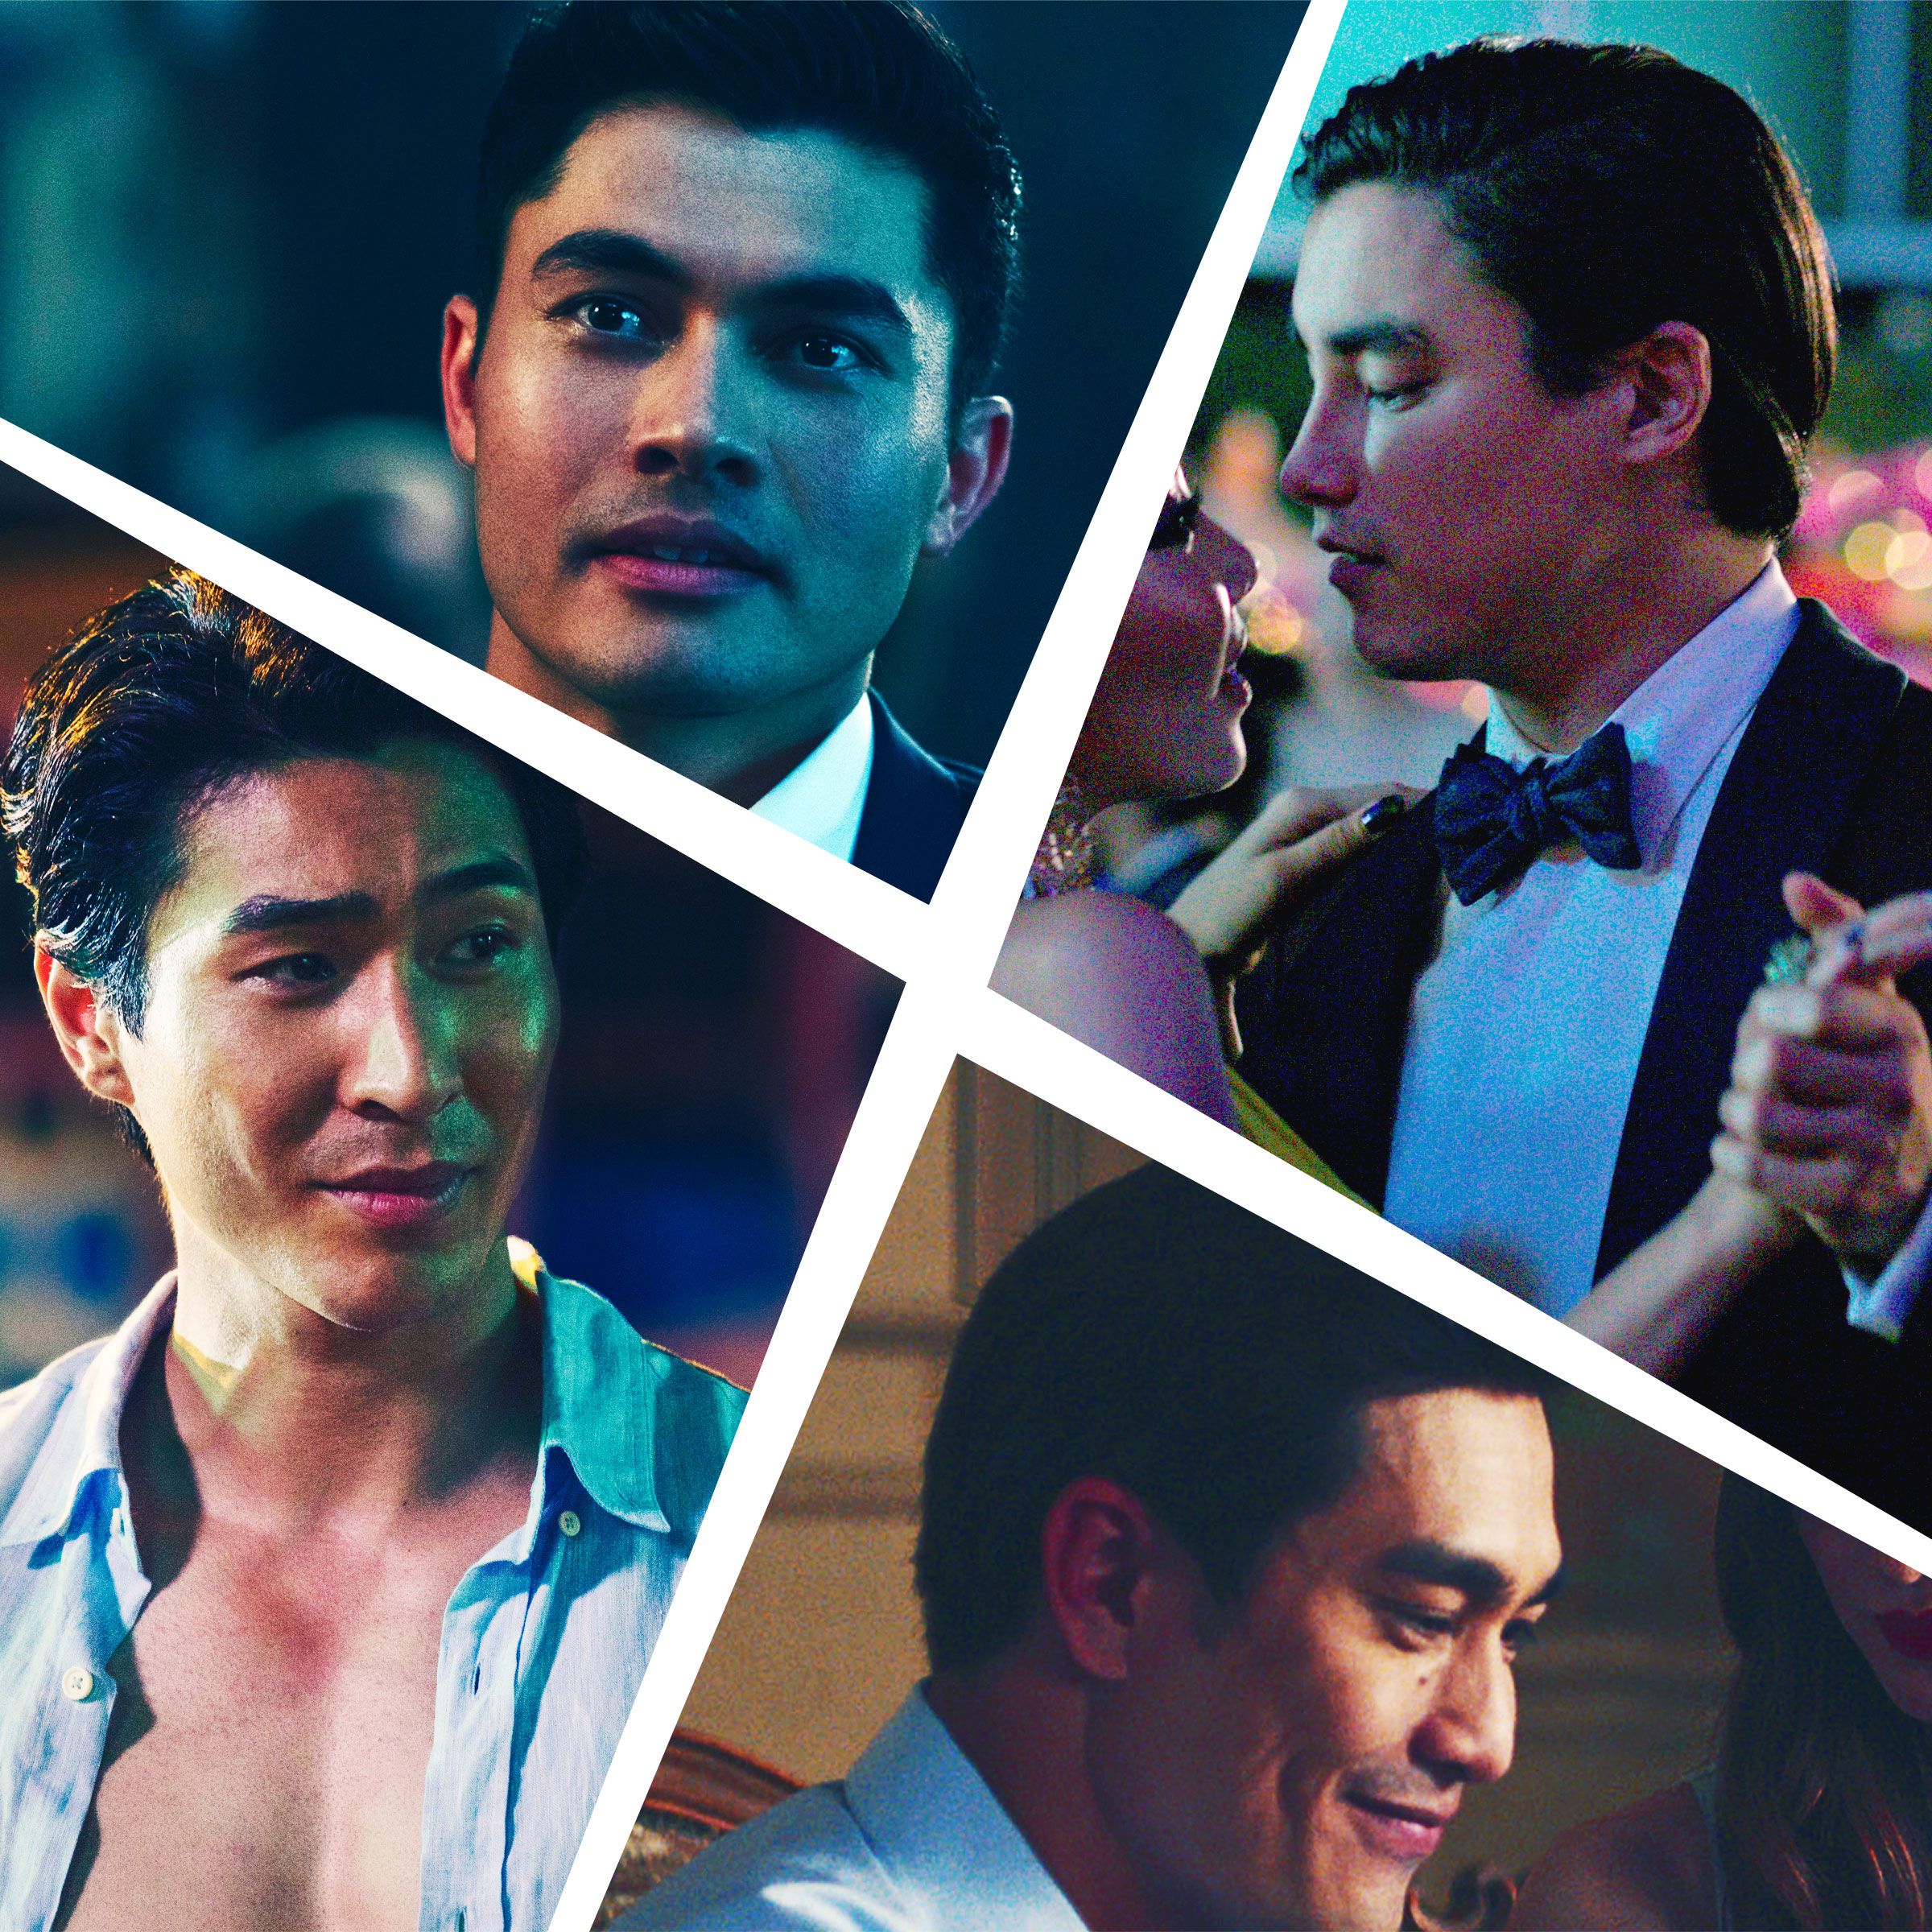 An Ode to the Hot Men of Crazy Rich Asians